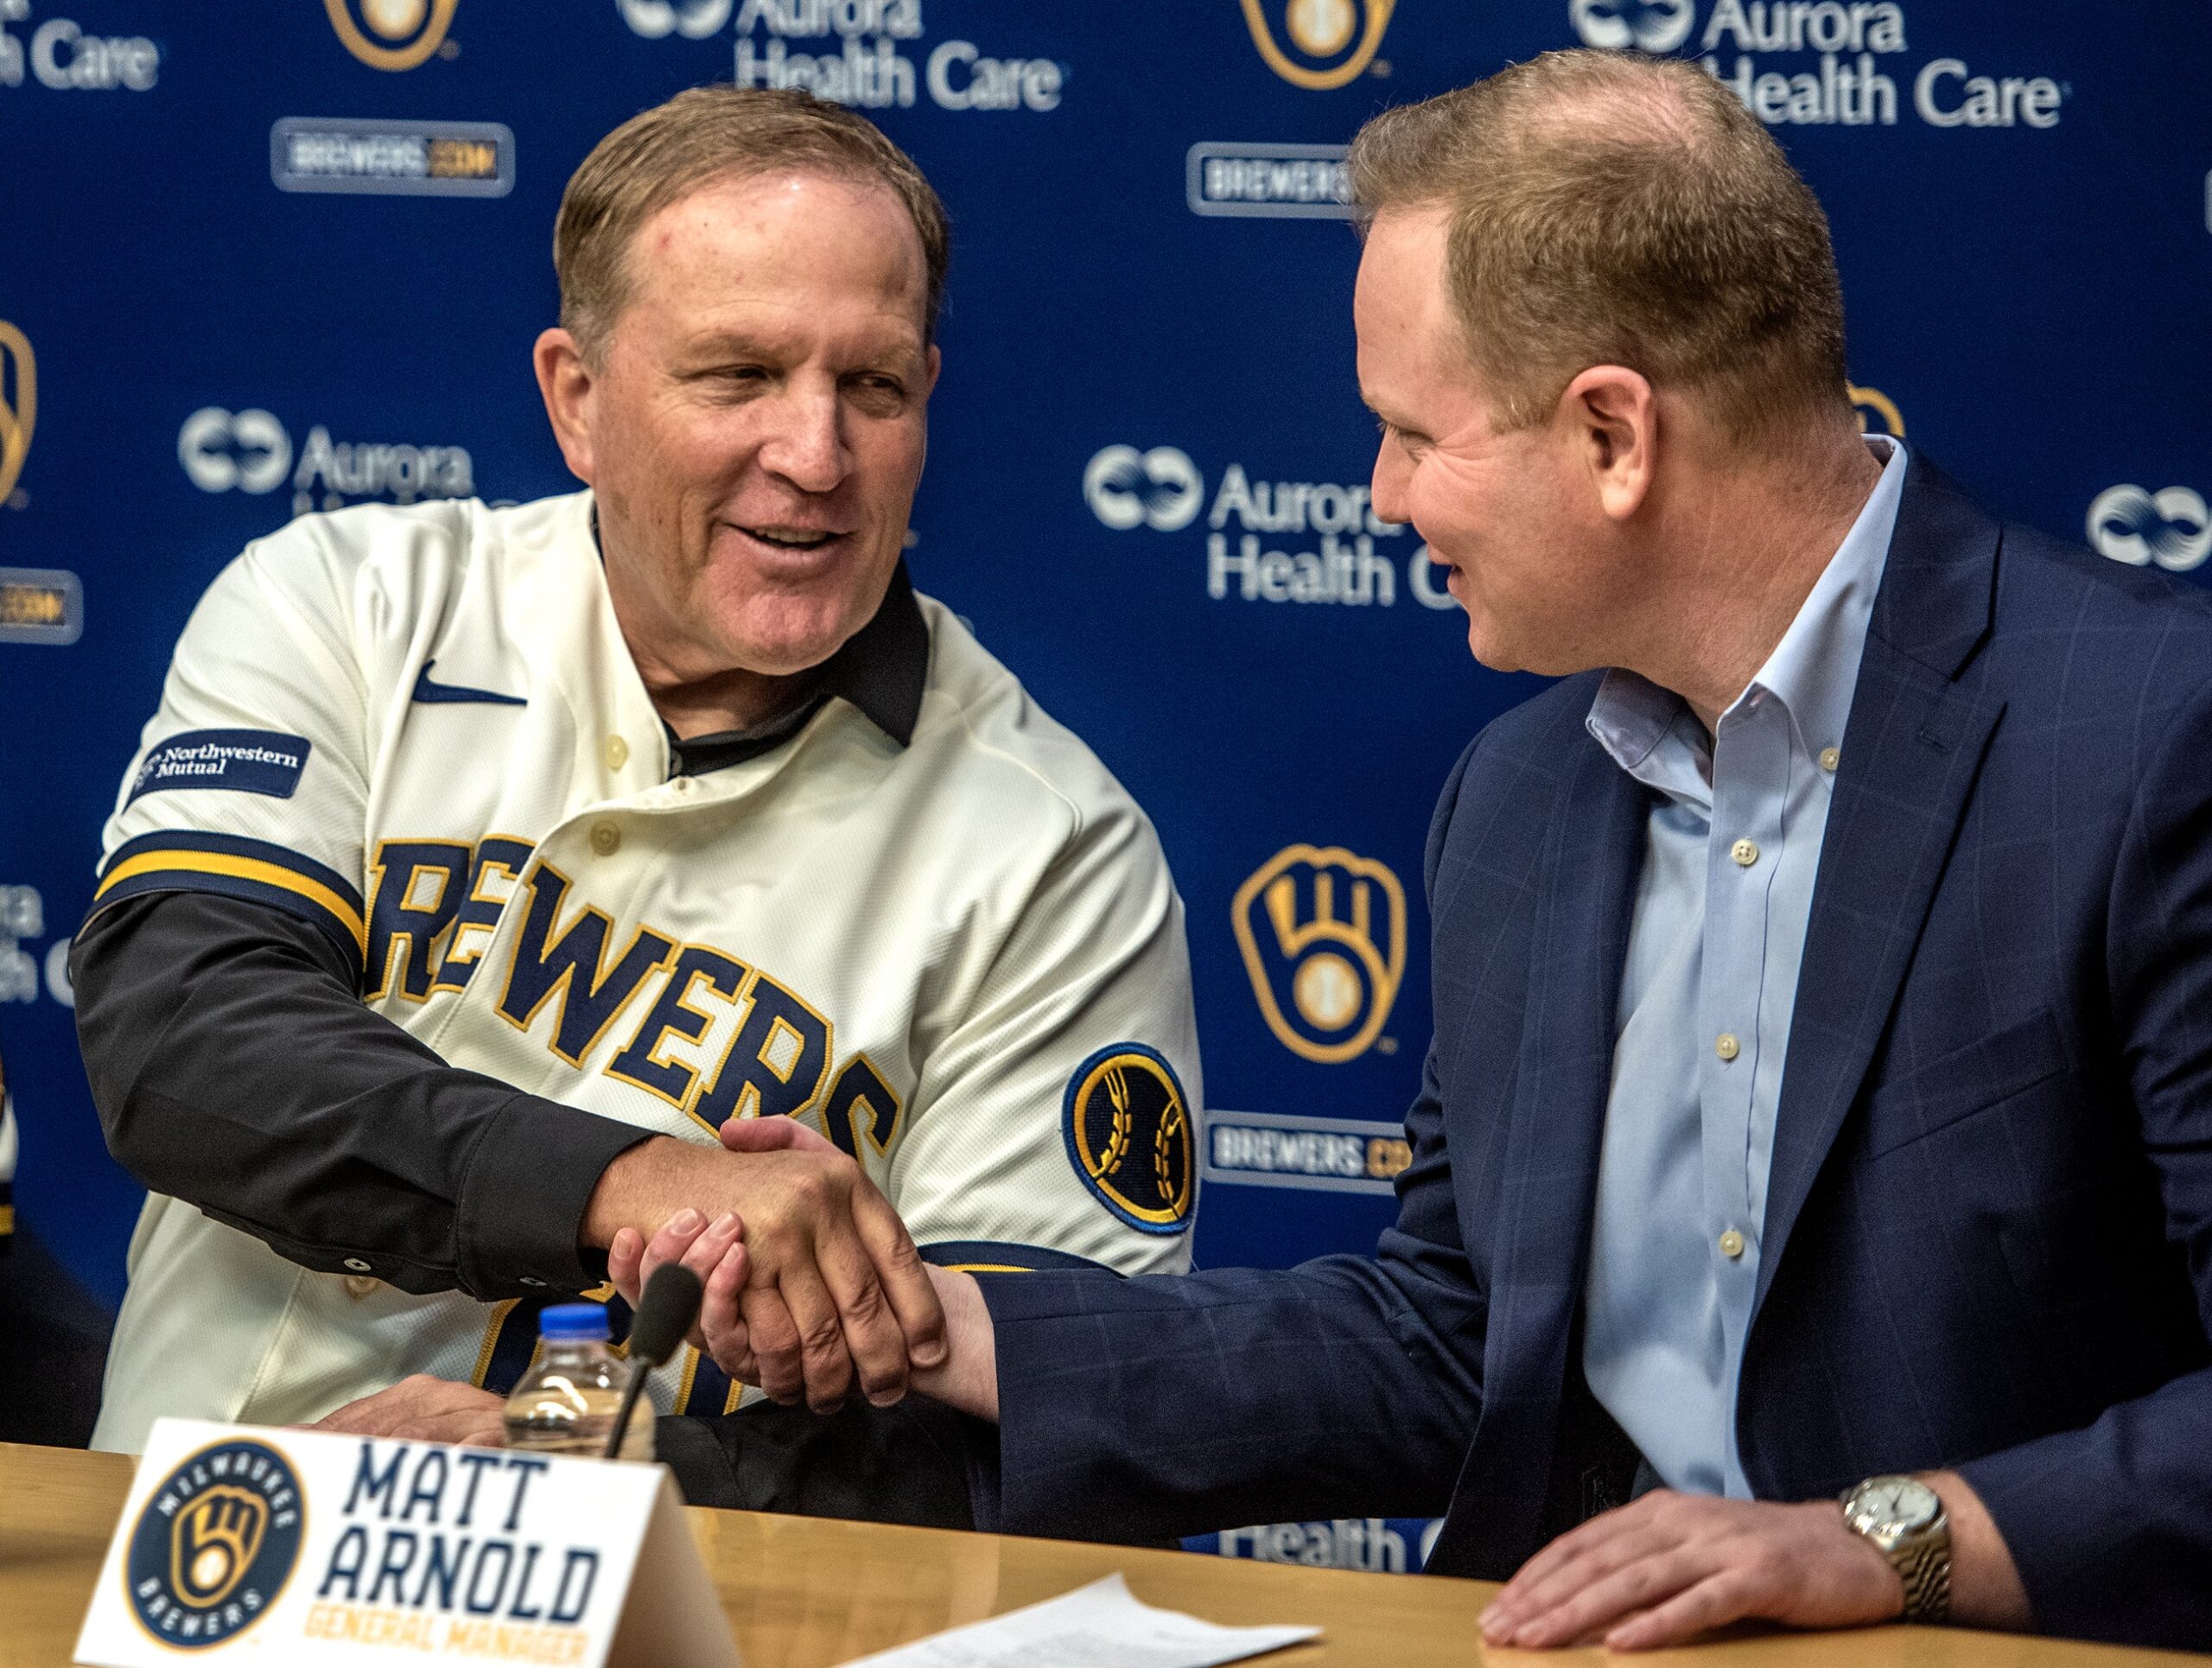 Pat Murphy wears a Brewers jersey as he leans over to shake hands with the general manager.